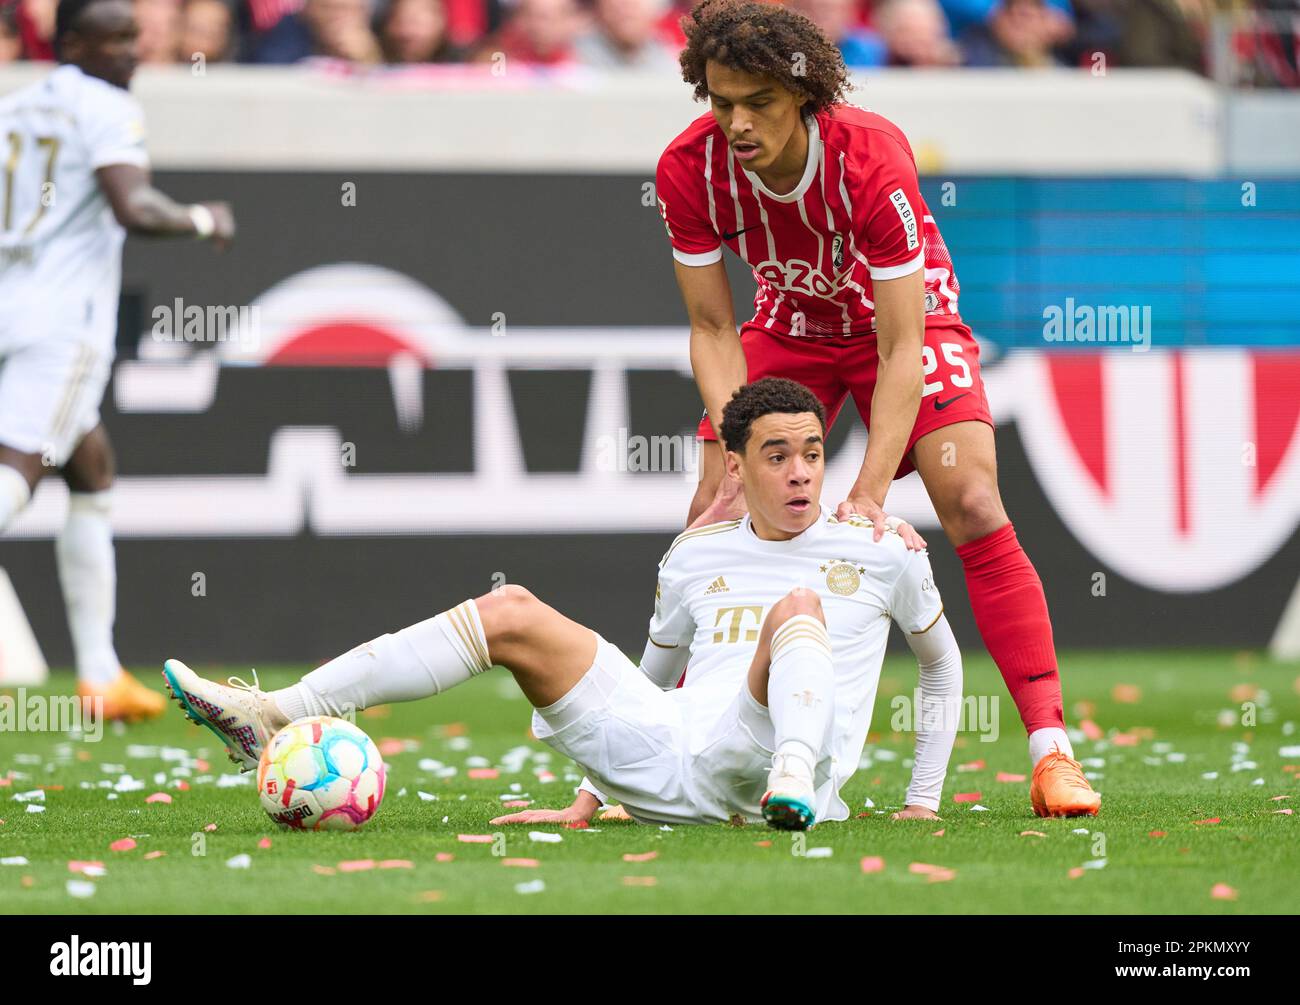 Kiliann Sildillia, FRG 25  compete for the ball, tackling, duel, header, zweikampf, action, fight against Jamal MUSIALA, FCB 42  in the match SC FREIBURG - FC BAYERN MUENCHEN 0-1 1.German Football League on Apr 8, 2023 in Freiburg, Germany. Season 2022/2023, matchday 27, 1.Bundesliga, FCB, BVB, München, 27.Spieltag. © Peter Schatz / Alamy Live News    - DFL REGULATIONS PROHIBIT ANY USE OF PHOTOGRAPHS as IMAGE SEQUENCES and/or QUASI-VIDEO - Stock Photo